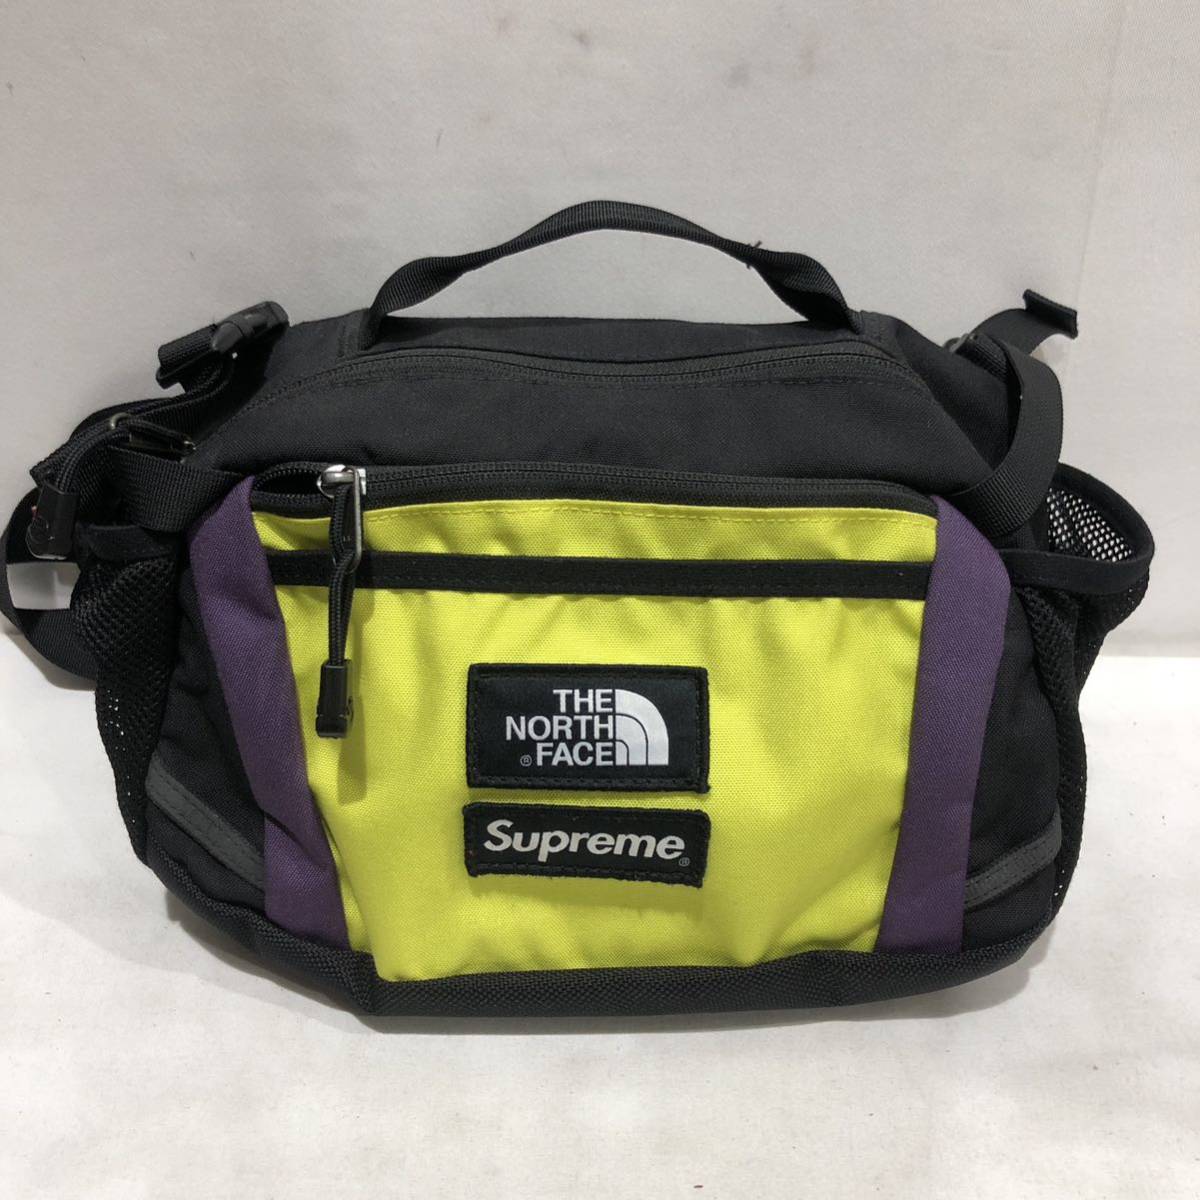 【THE NORTH FACE】ウエストバッグ ザノースフェイス BLK nf0a3se7 ナイロン ts202312